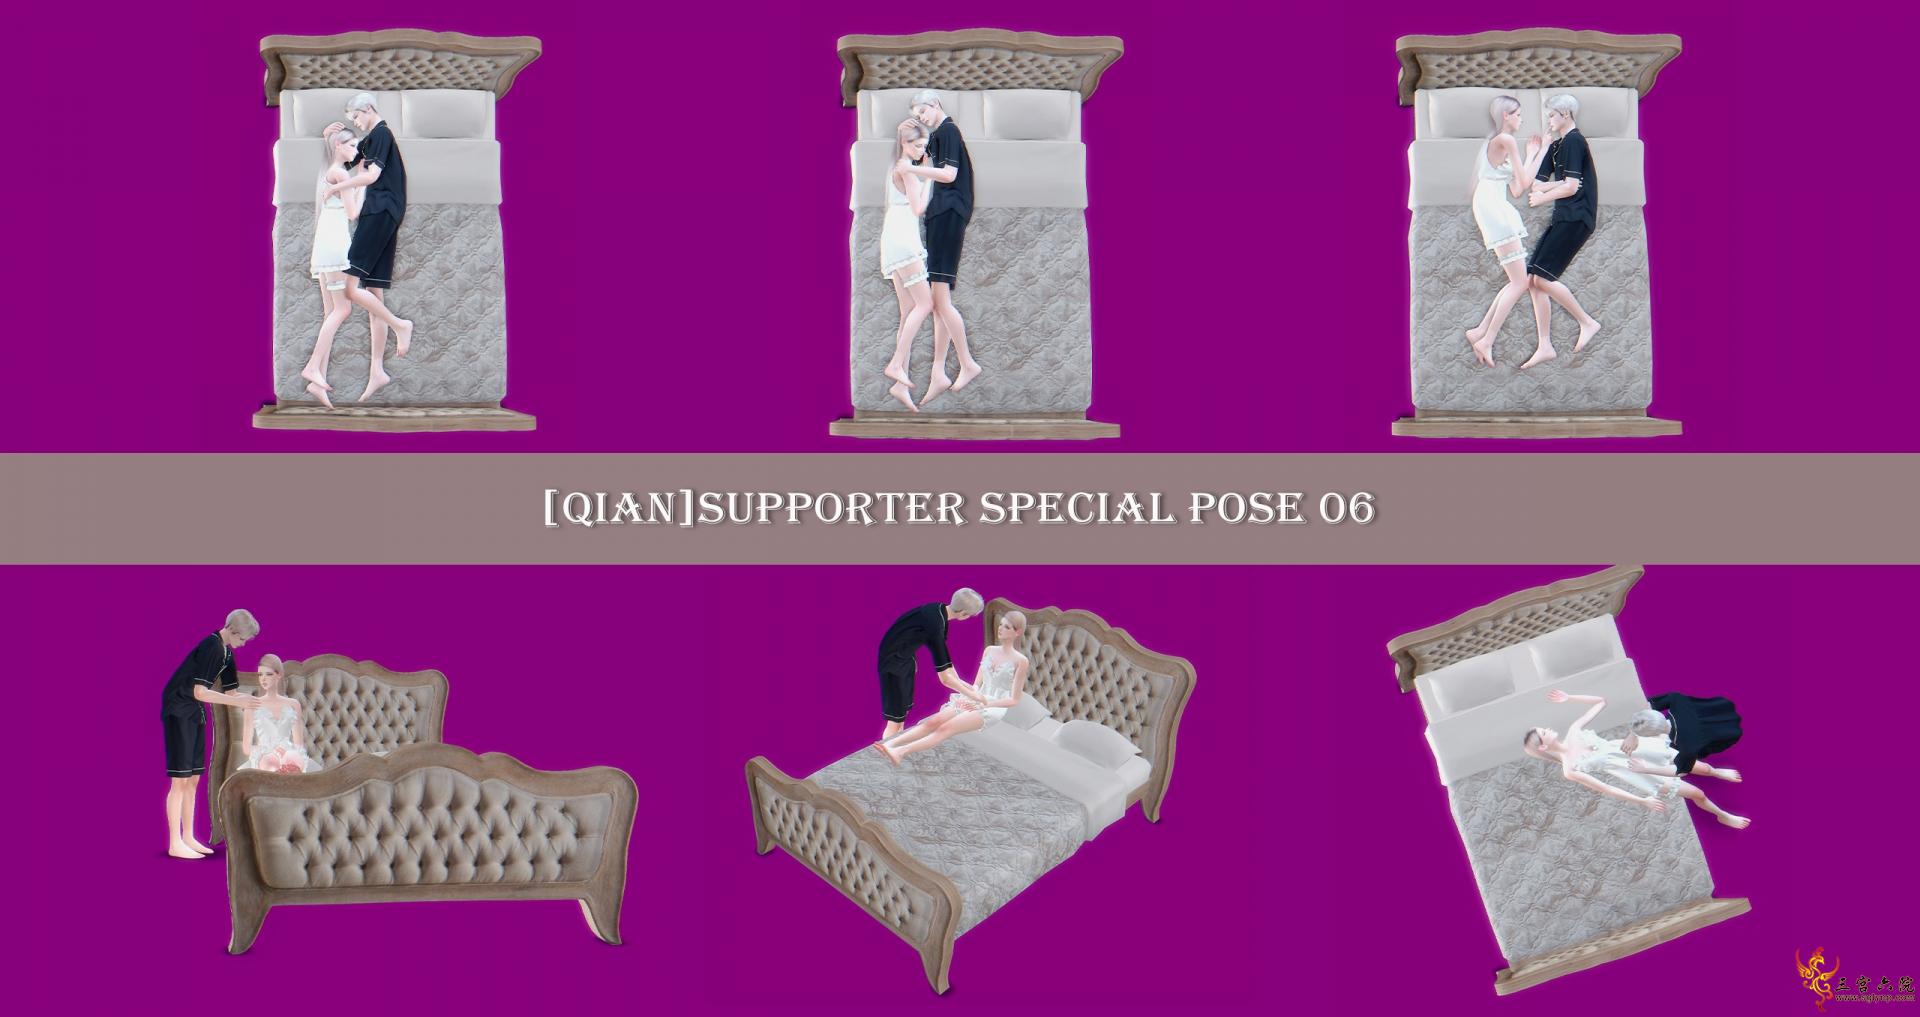 [Qian]Supporter Special pose 06.jpg